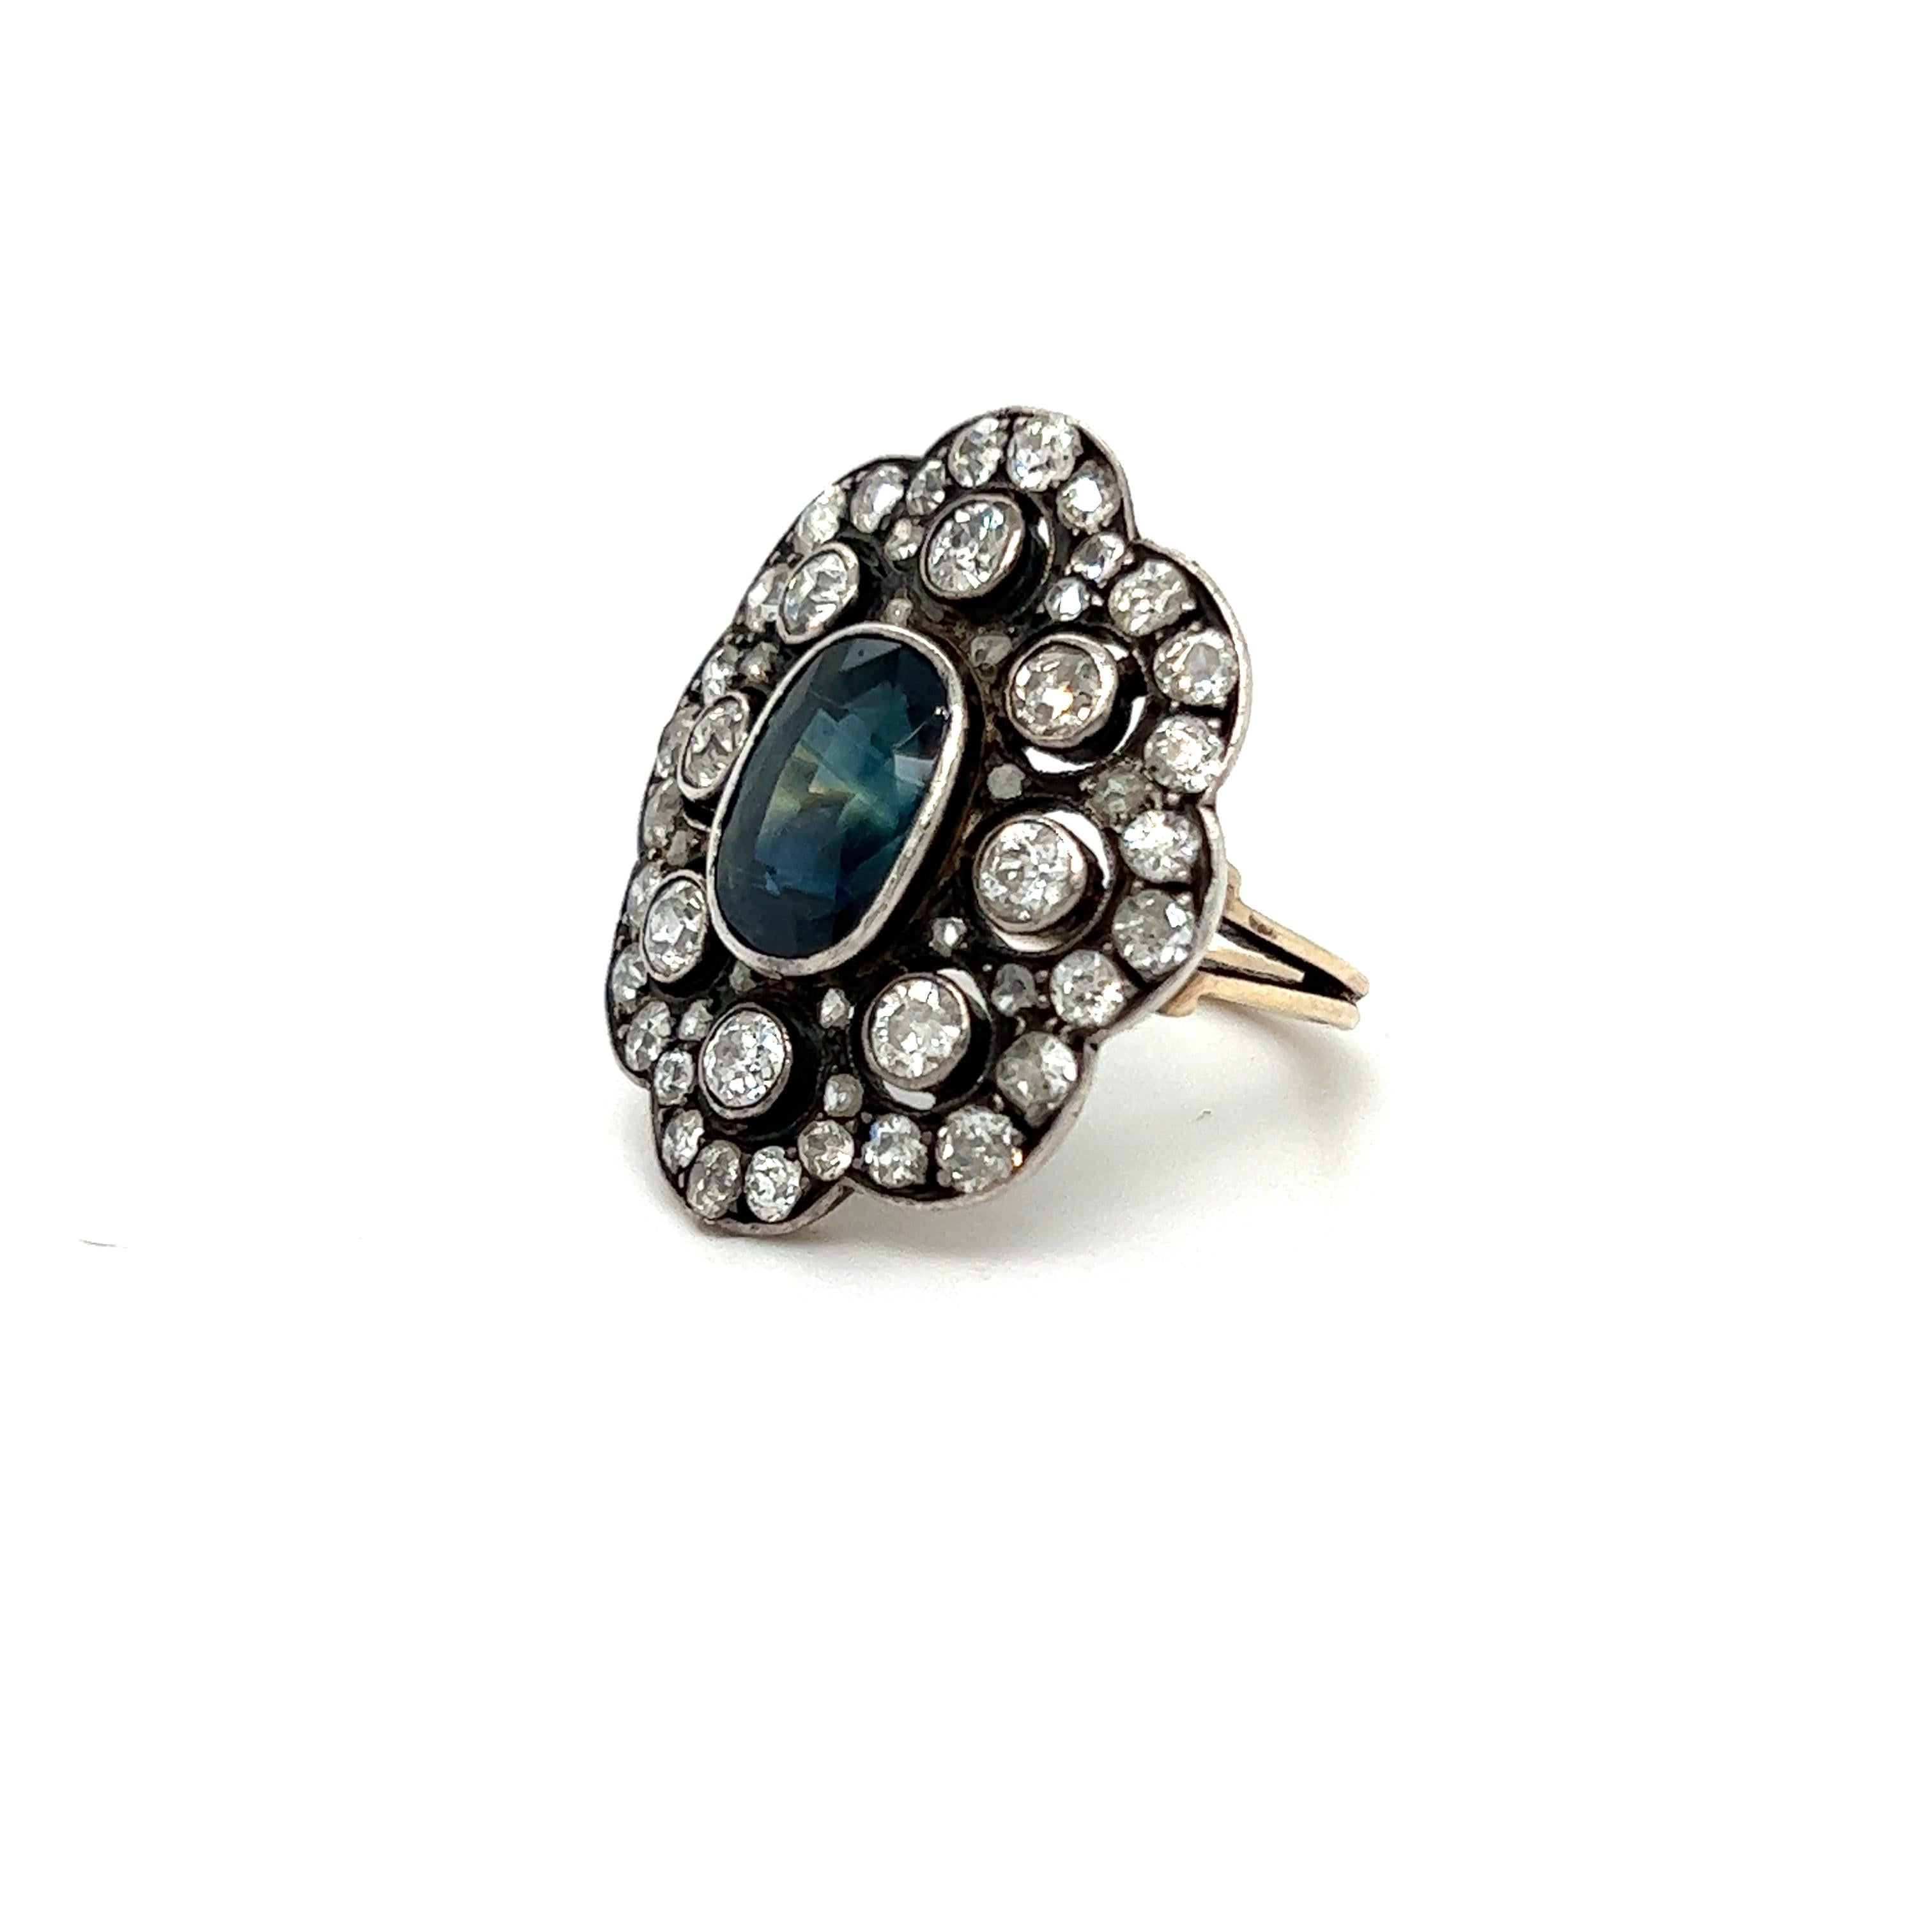 Victorian Gorgeous Antique Russian 14K Yellow Gold Diamond and Teal Sapphire Ring - 5.25ct For Sale